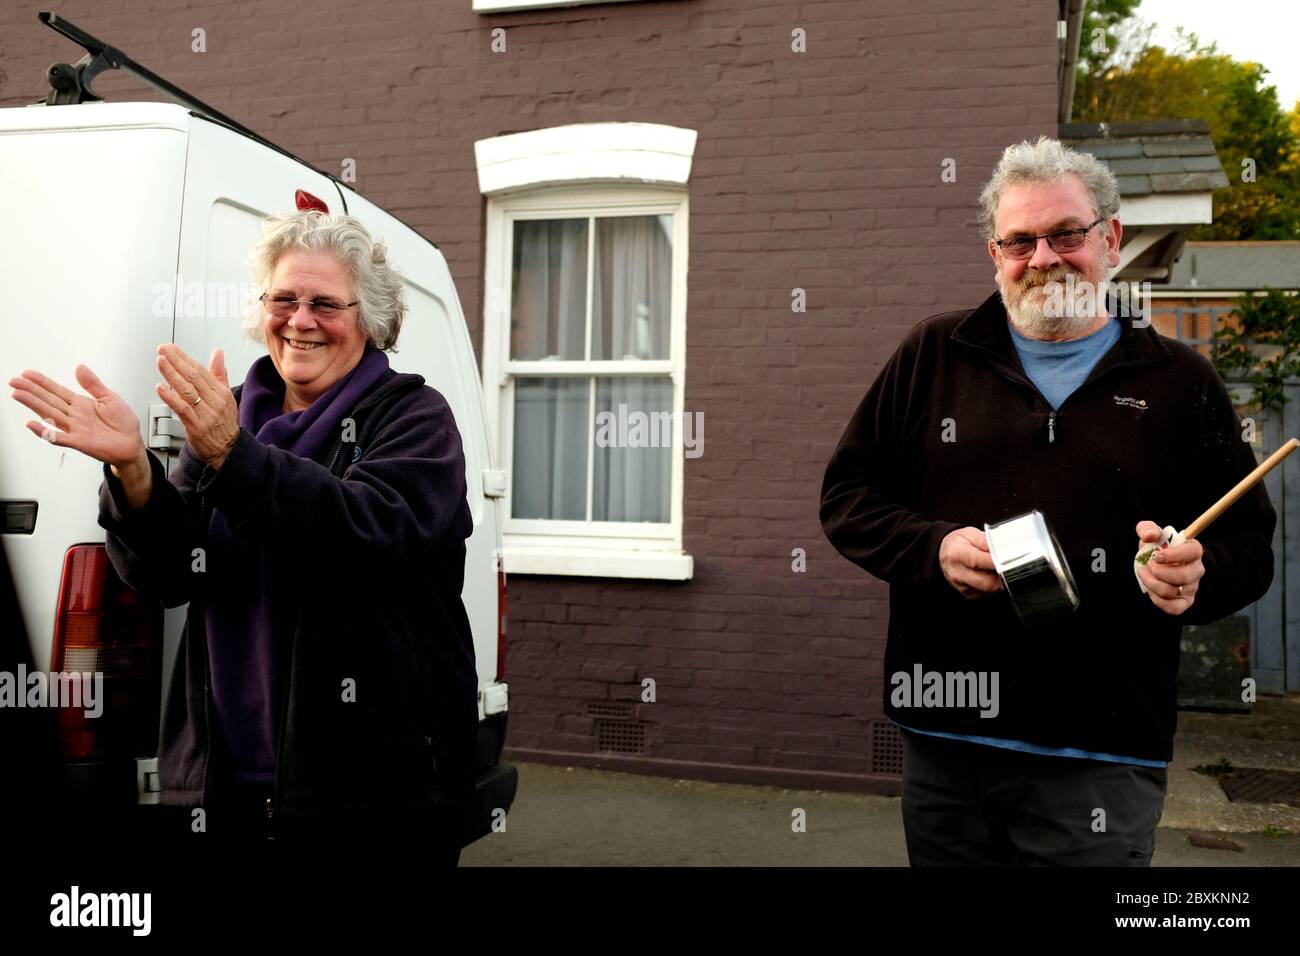 Clap for the NHS couple outside their house on the roadside smiling and clapping Stock Photo